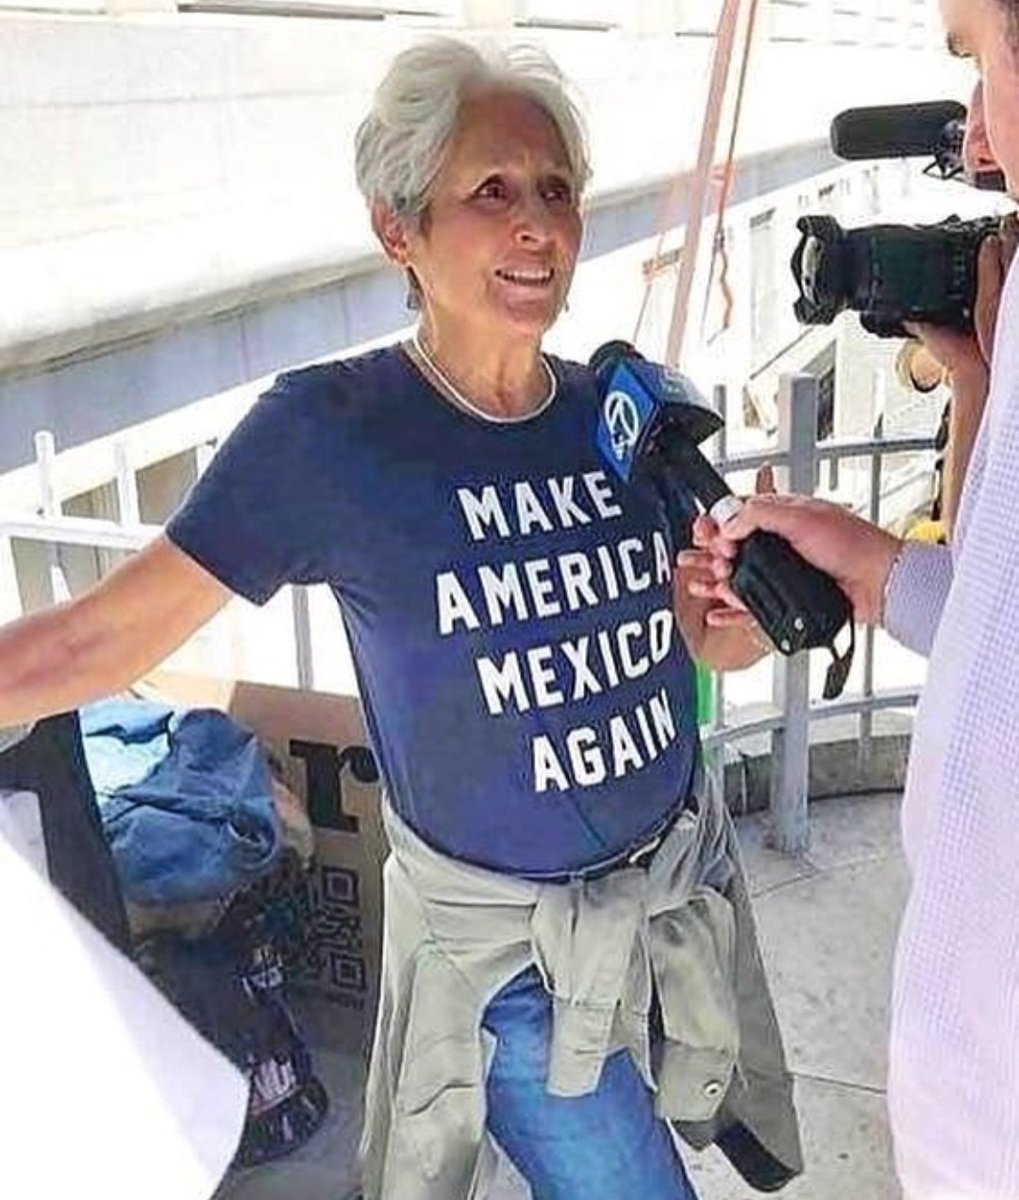 last but not least "make America Mexico again" and her constant opposition to Trump